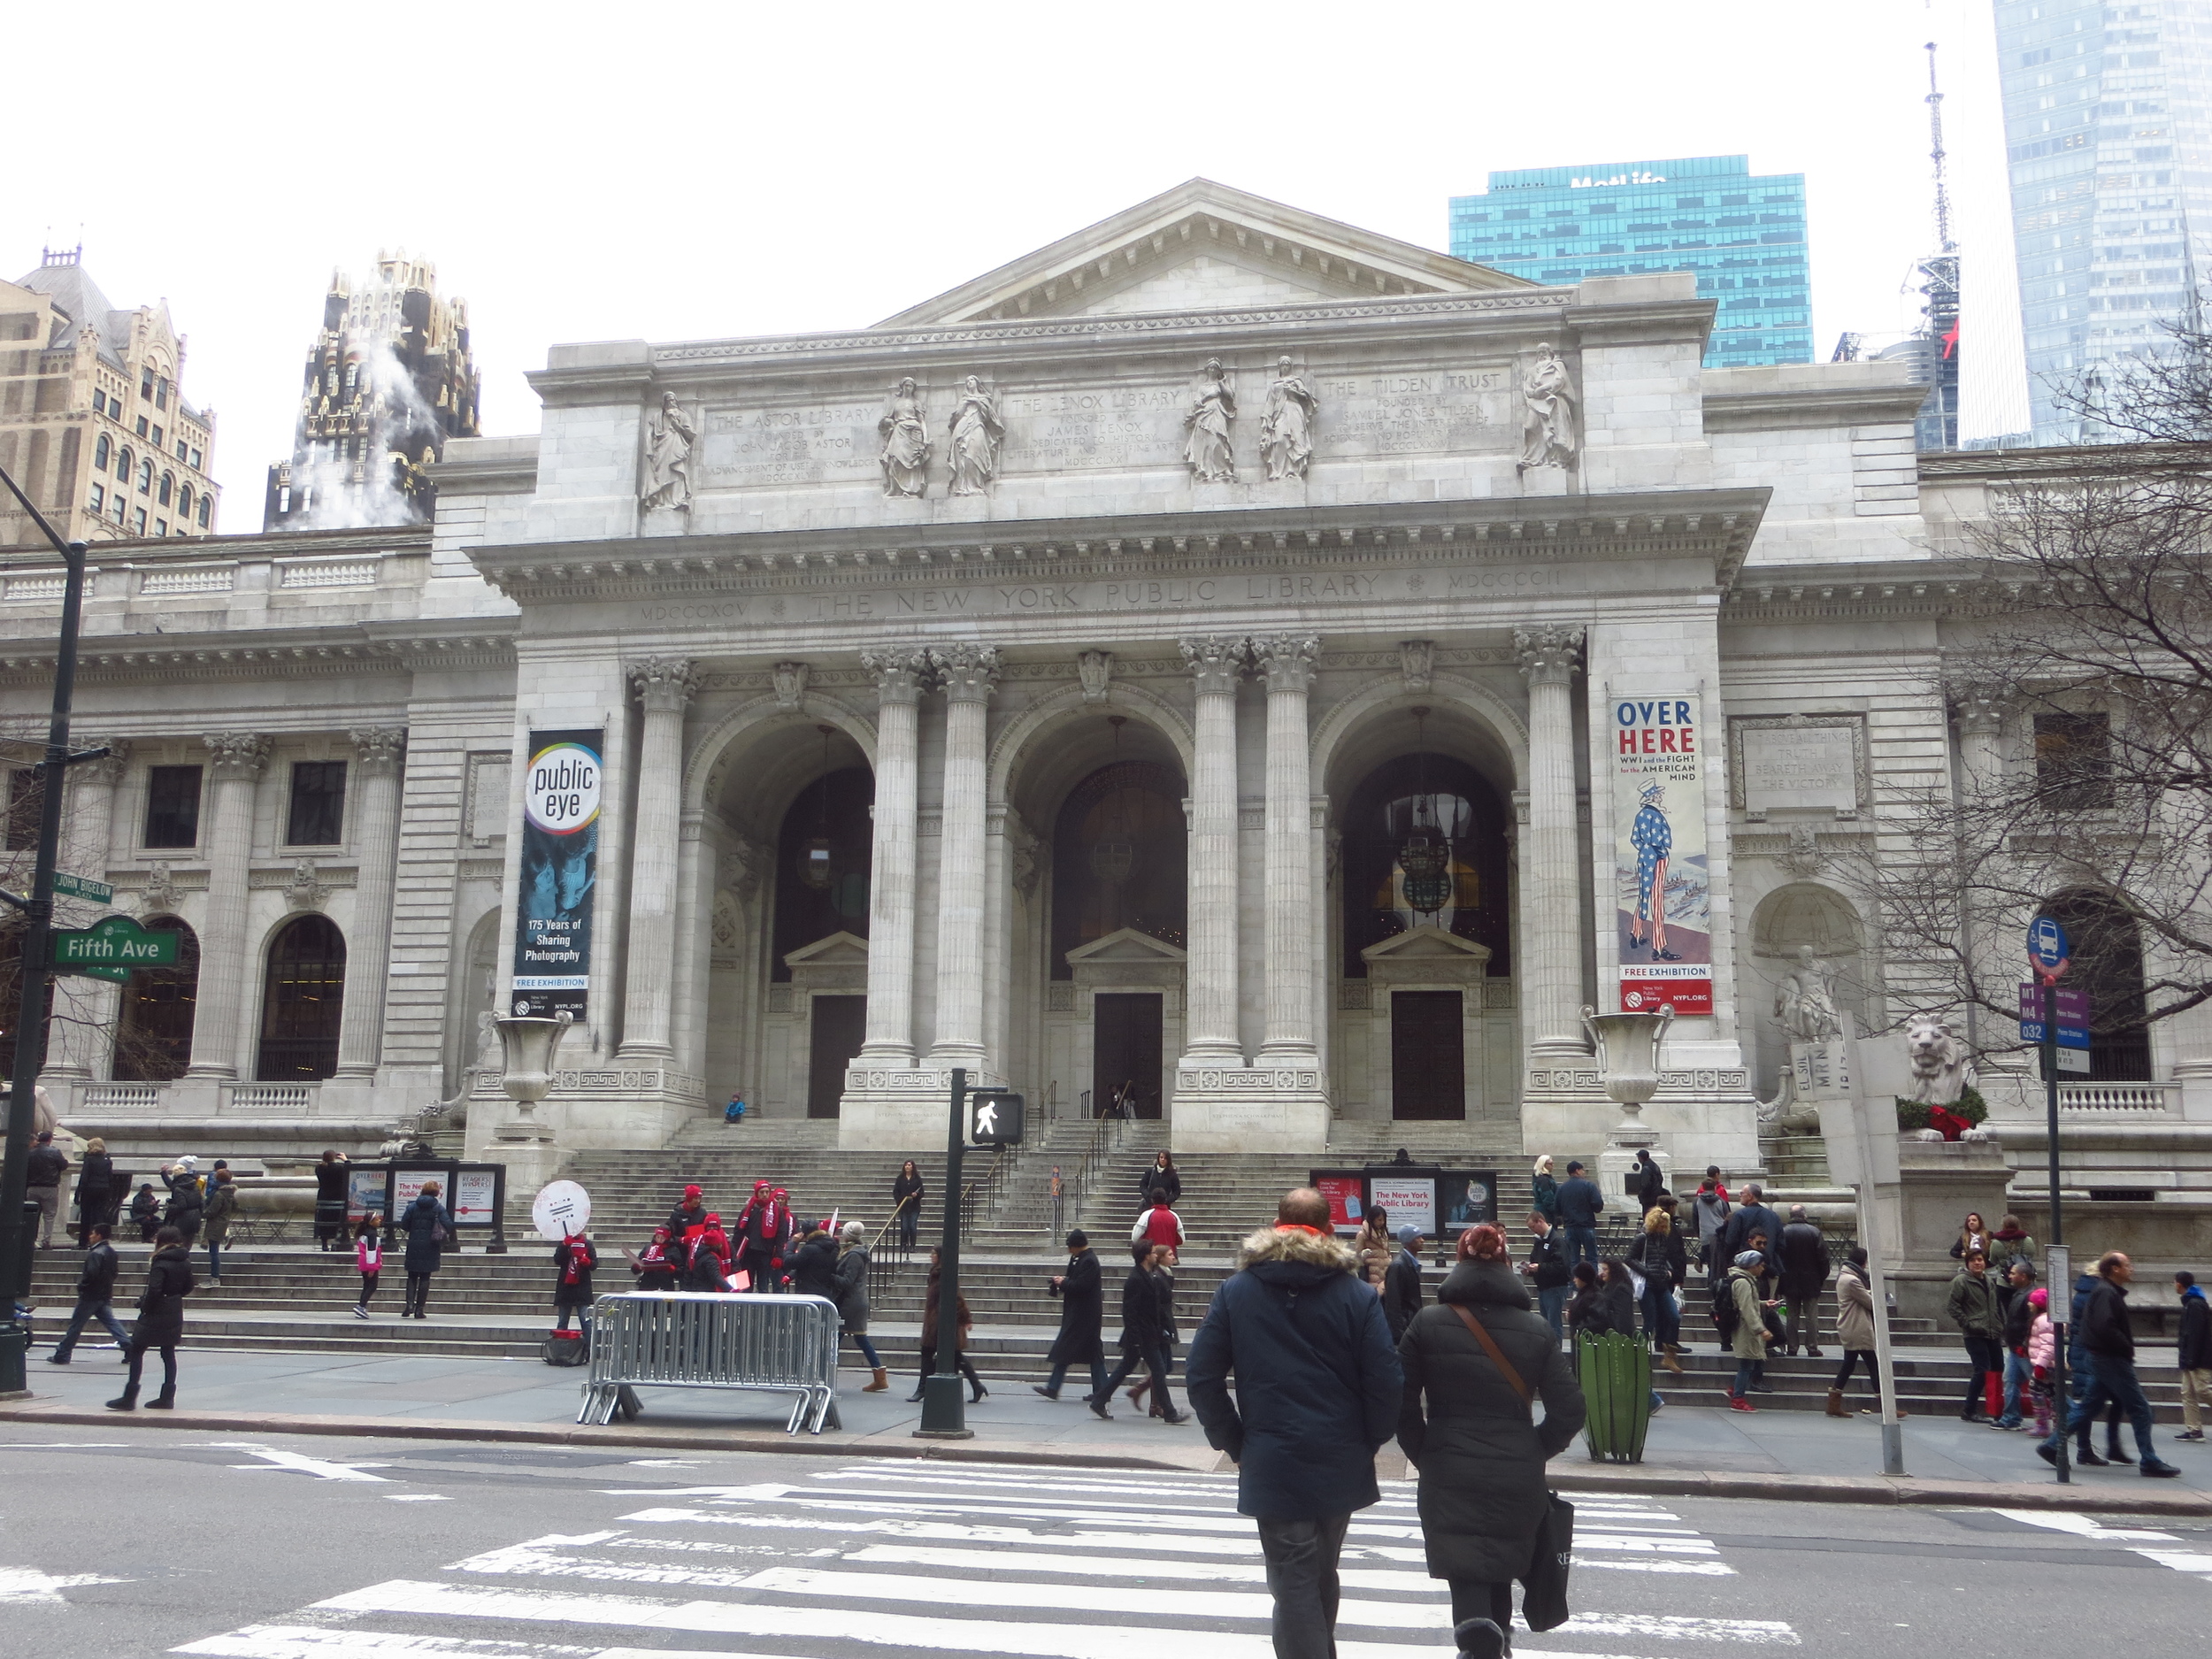 New York Public Library (made famous in the movie "Ghostbusters")